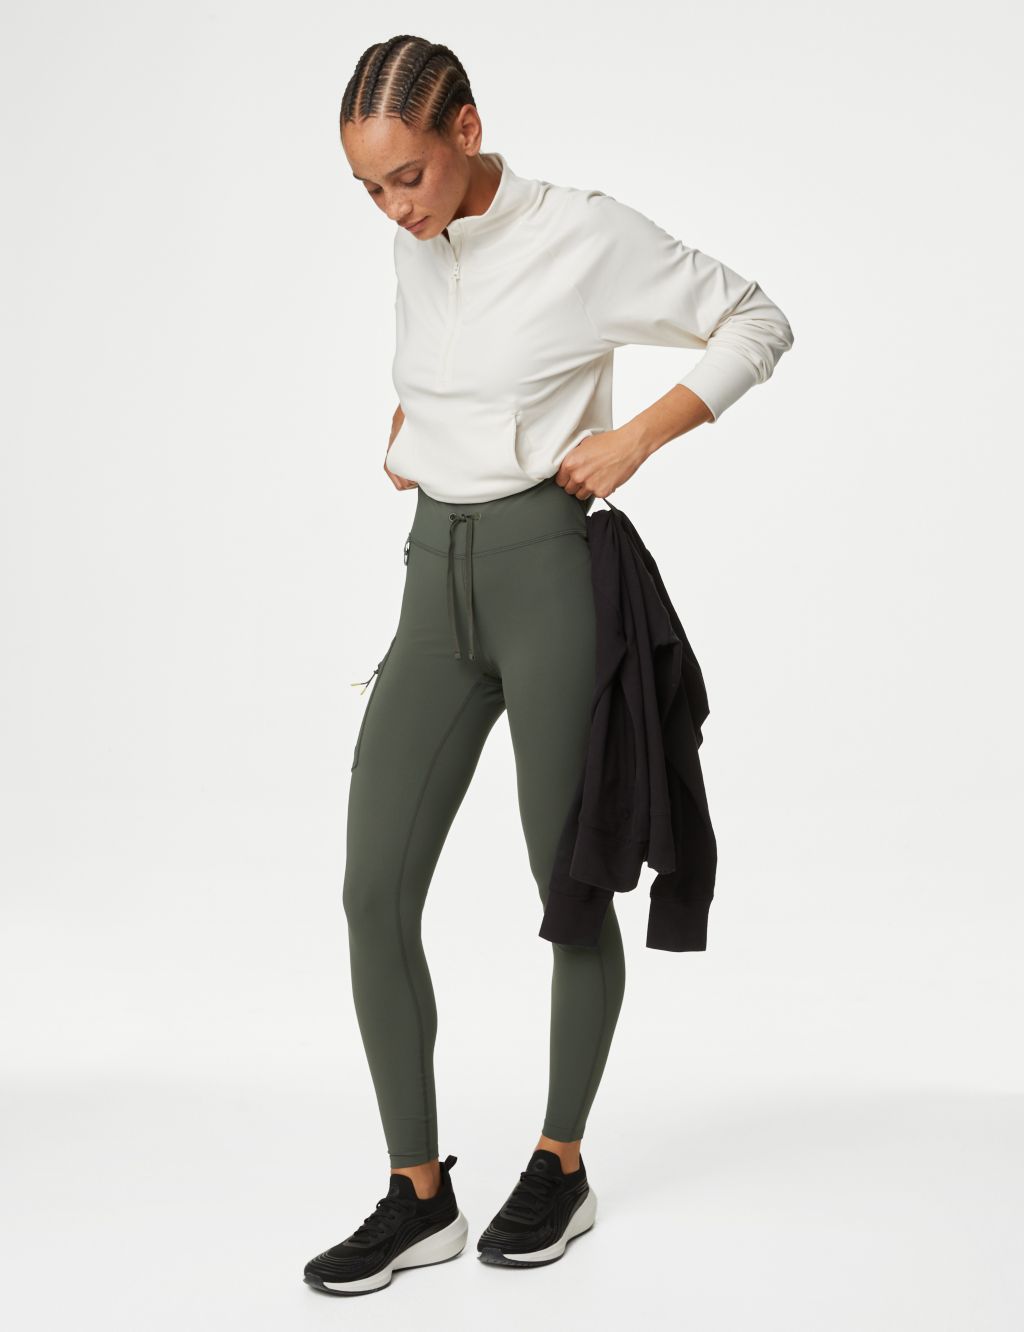 Olive green timberlands  Outfits with leggings, Green leggings outfit,  Olive green outfit